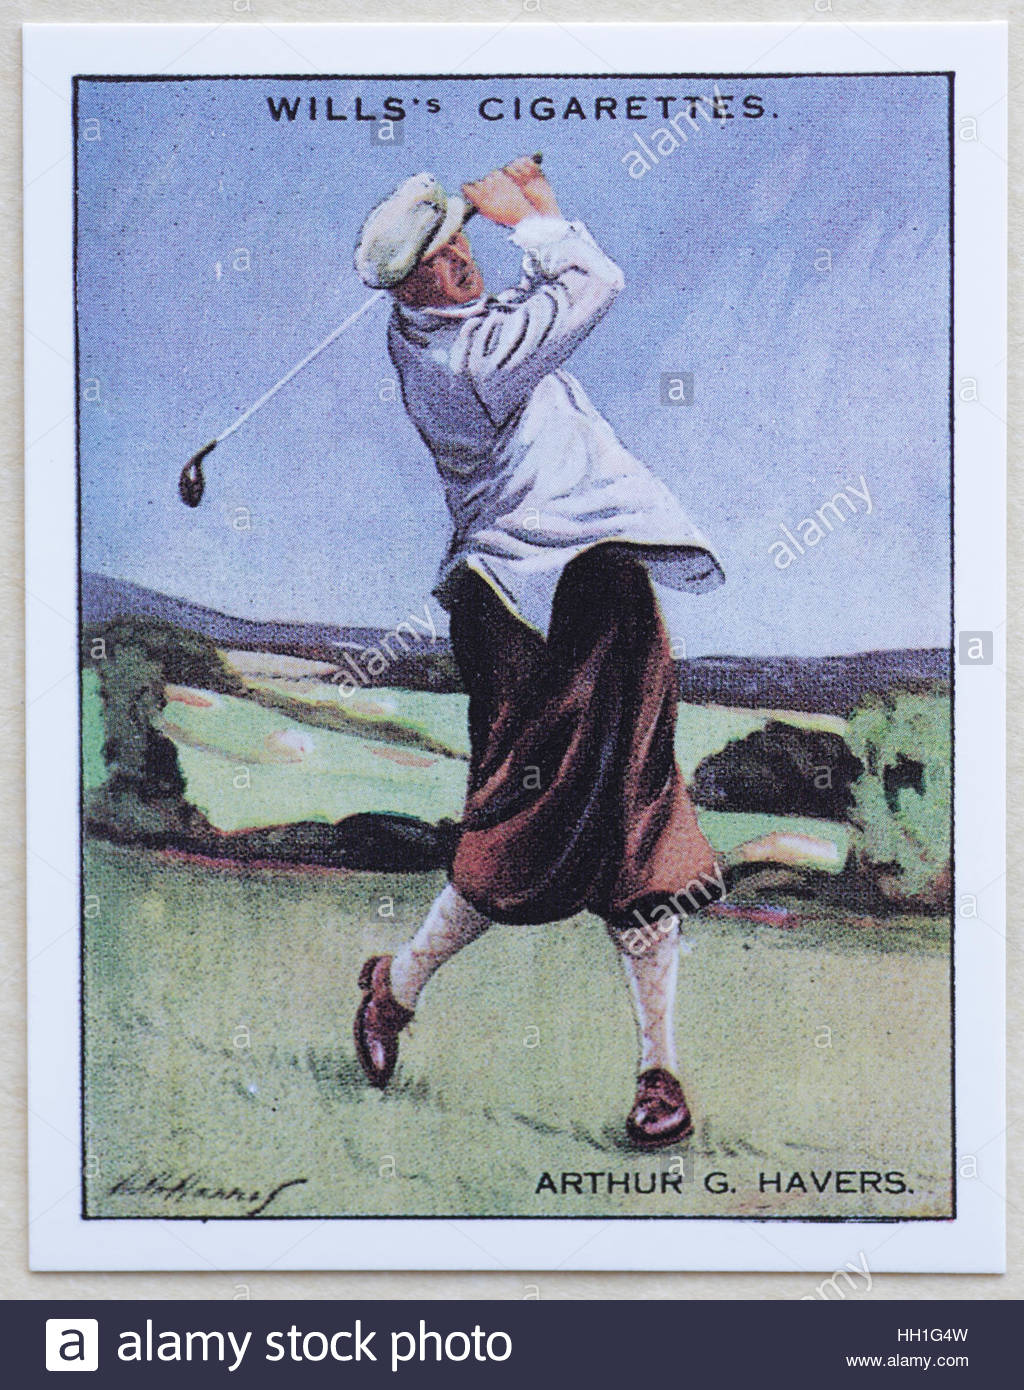 Arthur Gladstone Havers -  Famous Golfers, cigarette cards issued in 1930 by W.D.& H.O. Wills cigarettes. Stock Photo